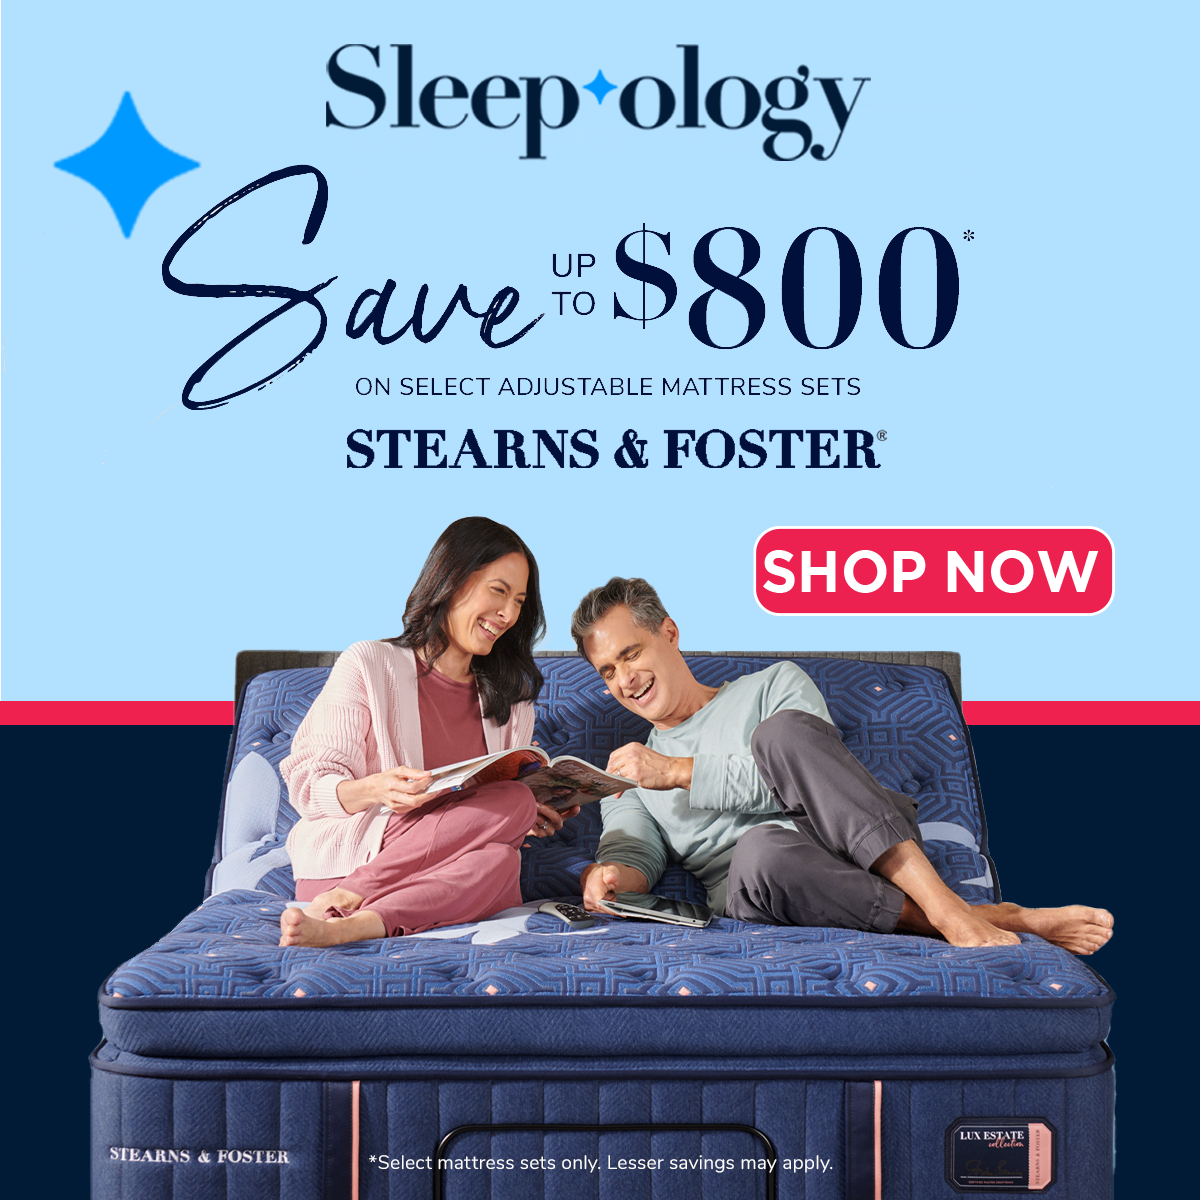 Sleepology Stearns and Foster Mattress Save up to $800